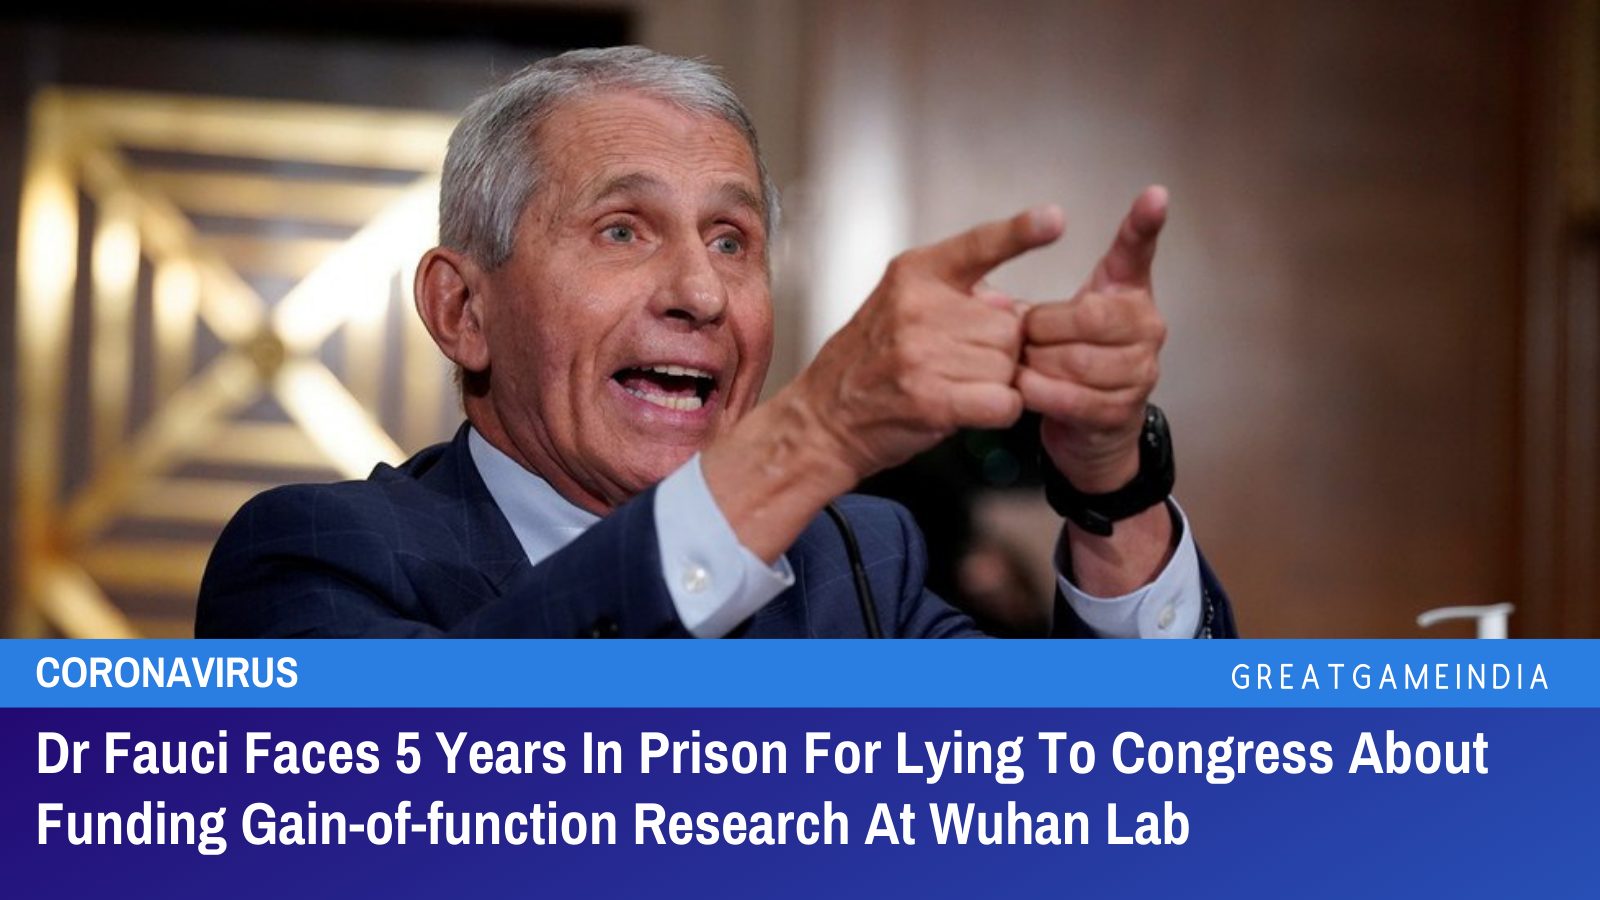 Dr Fauci Faces 5 Years In Prison For Lying To Congress About Funding Gain-of-function Research At Wuhan Lab